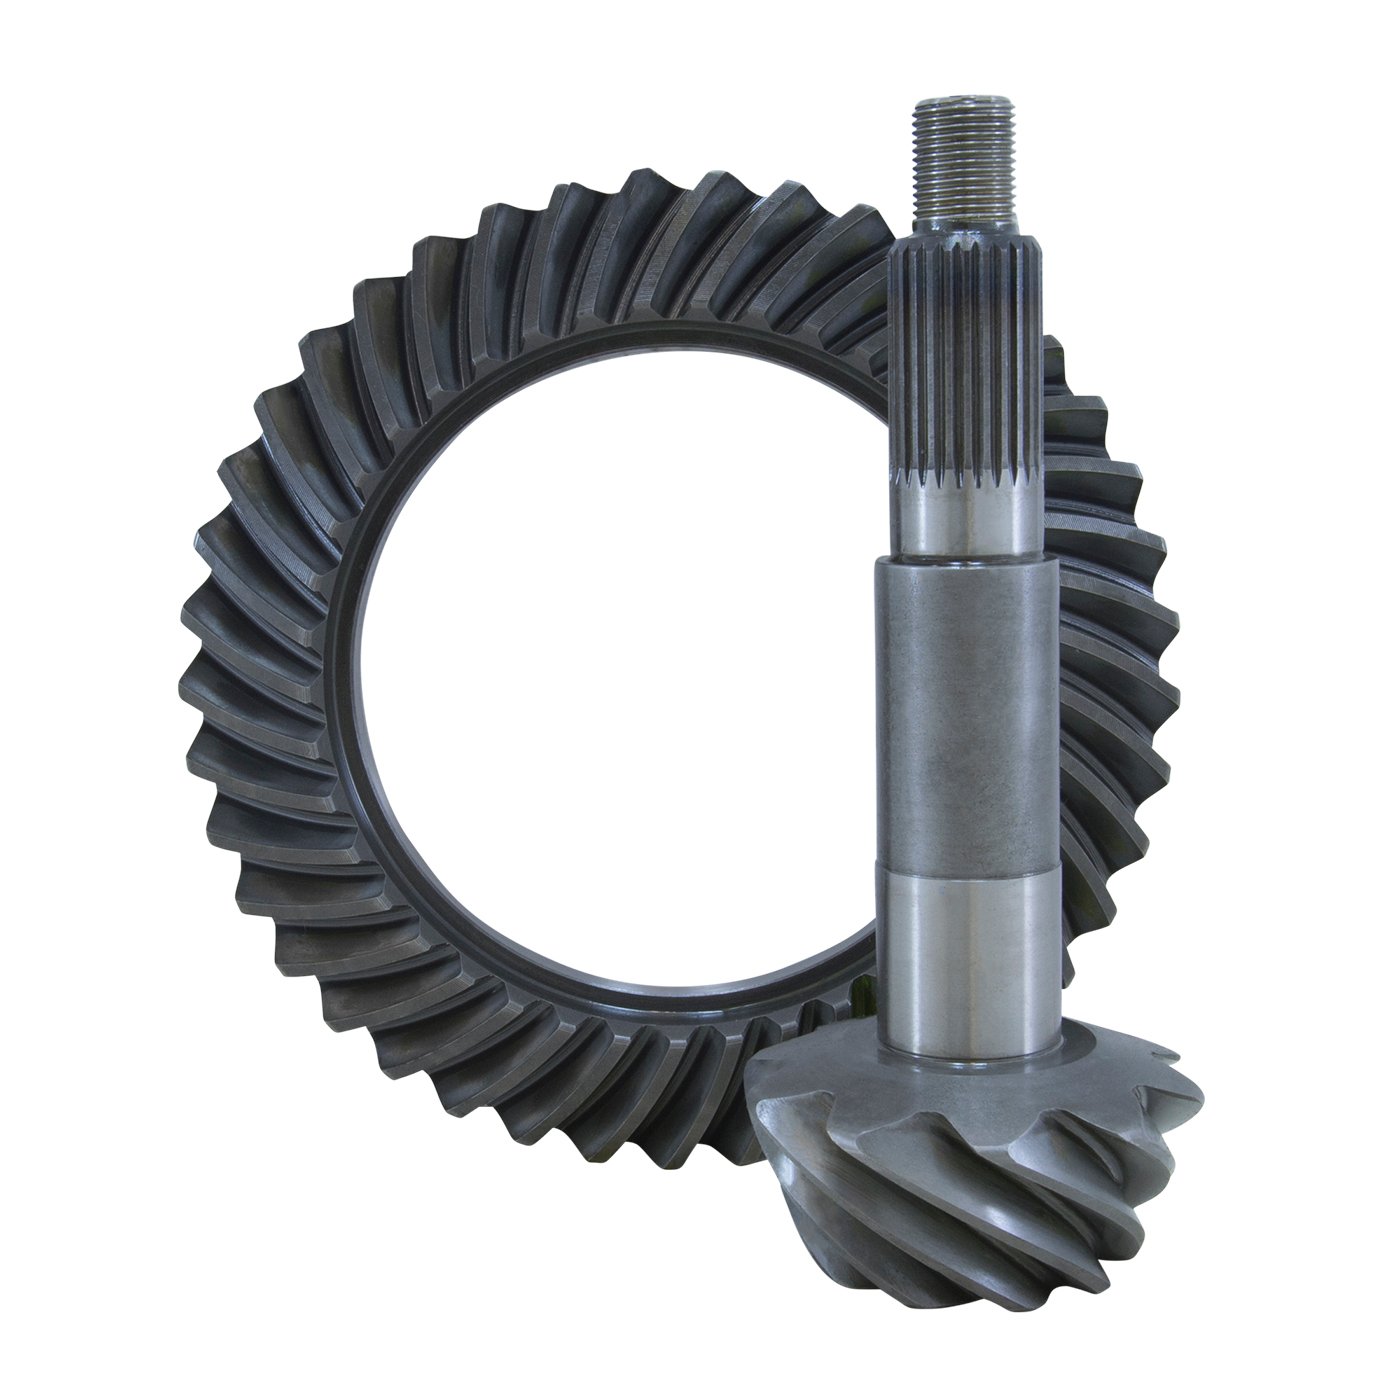 USA Standard ZG D44-392 Replacement Ring & Pinion Gear Set, For Dana 44, 3.92 Ratio.